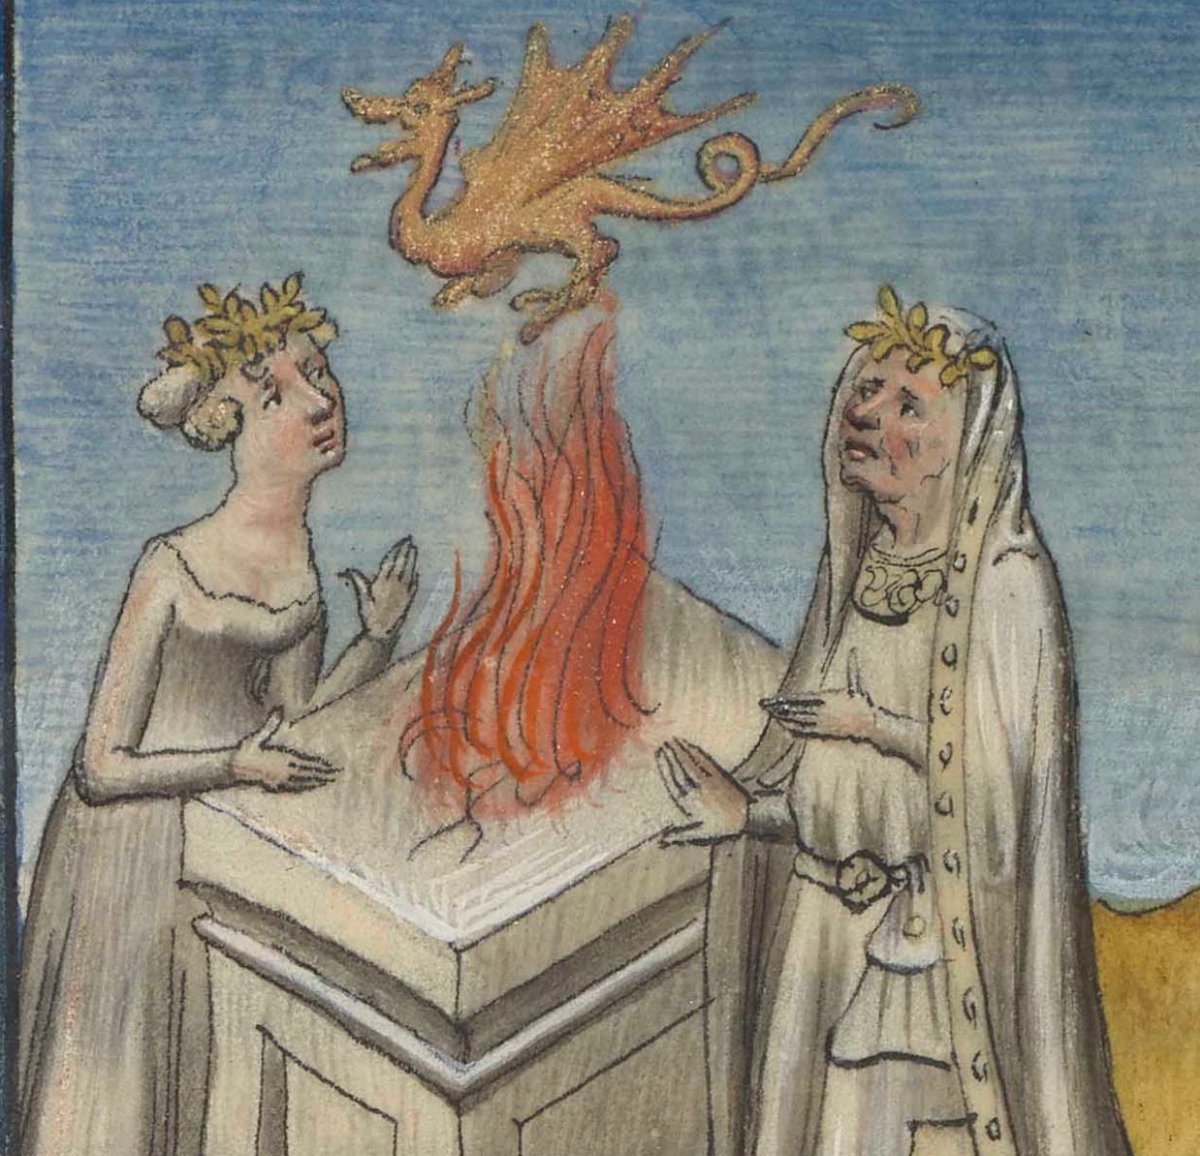 on-beornan, str.v: to set fire to, to kindle; to inflame. (on-BEH-or-nahn / ɔn-ˈbɛɔr-nan) Image: Statius’ Thebaid and Achilleid; France (Paris), early 15th century; @BLMedieval Burney MS 257, f. 169v. #OldEnglish #WOTD